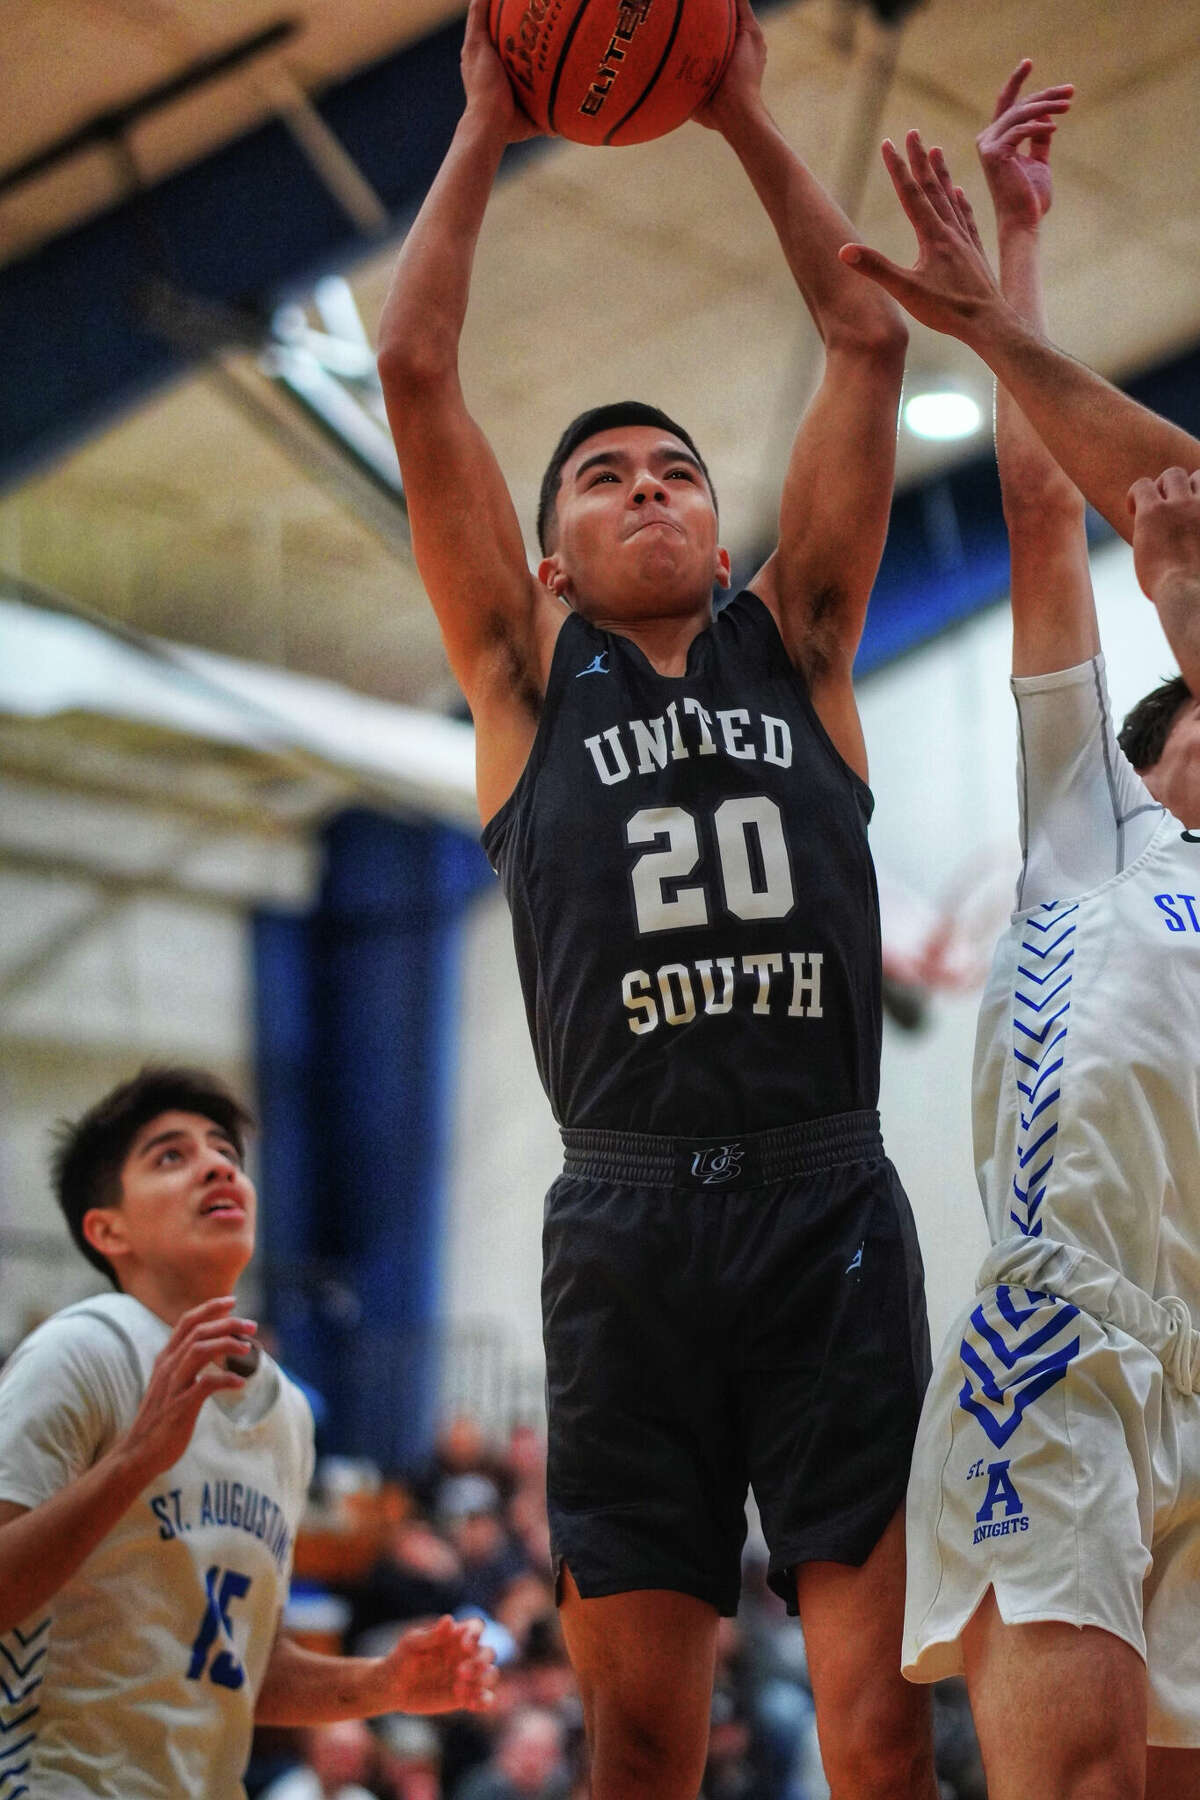 The Panthers continue to be one of, if not the most surprising team from the Gateway City this season. They had won four straight games prior to Thursday’s matchup against Somerset. United South looks like a legit contender for a District 30-6A title under new head coach Gogi Martinez. If their defense continues to perform like it has been, the Panthers could easily make some noise around South Texas later this season.